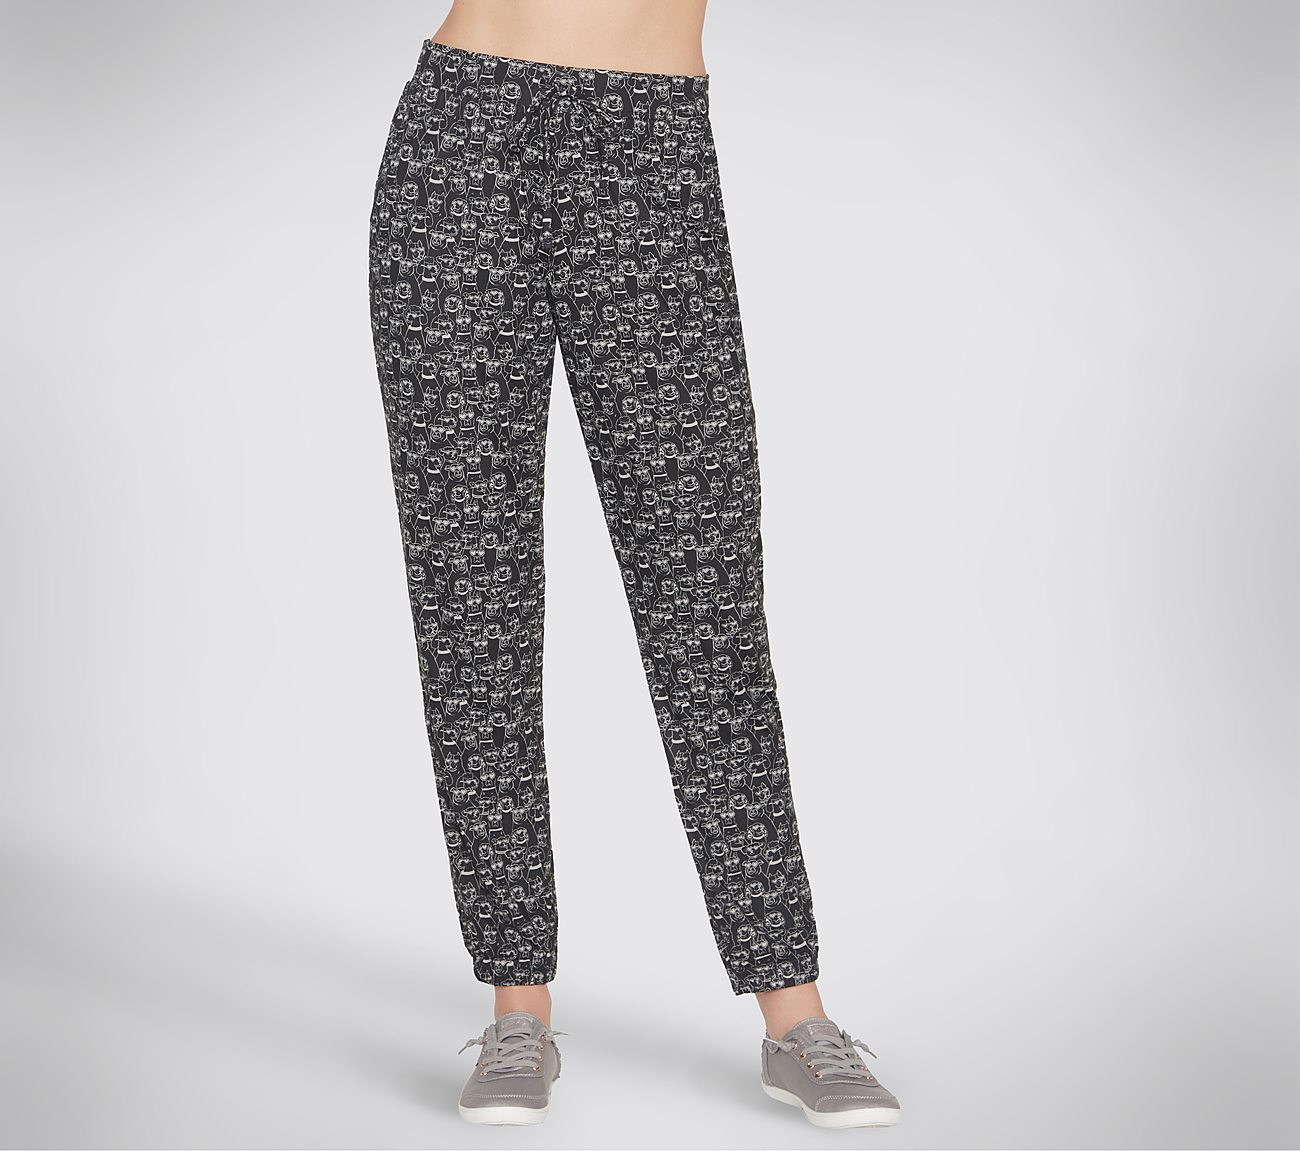 HEART EYES PEACHY PAWS JOGGER, BBBBLACK Apparel Lateral View